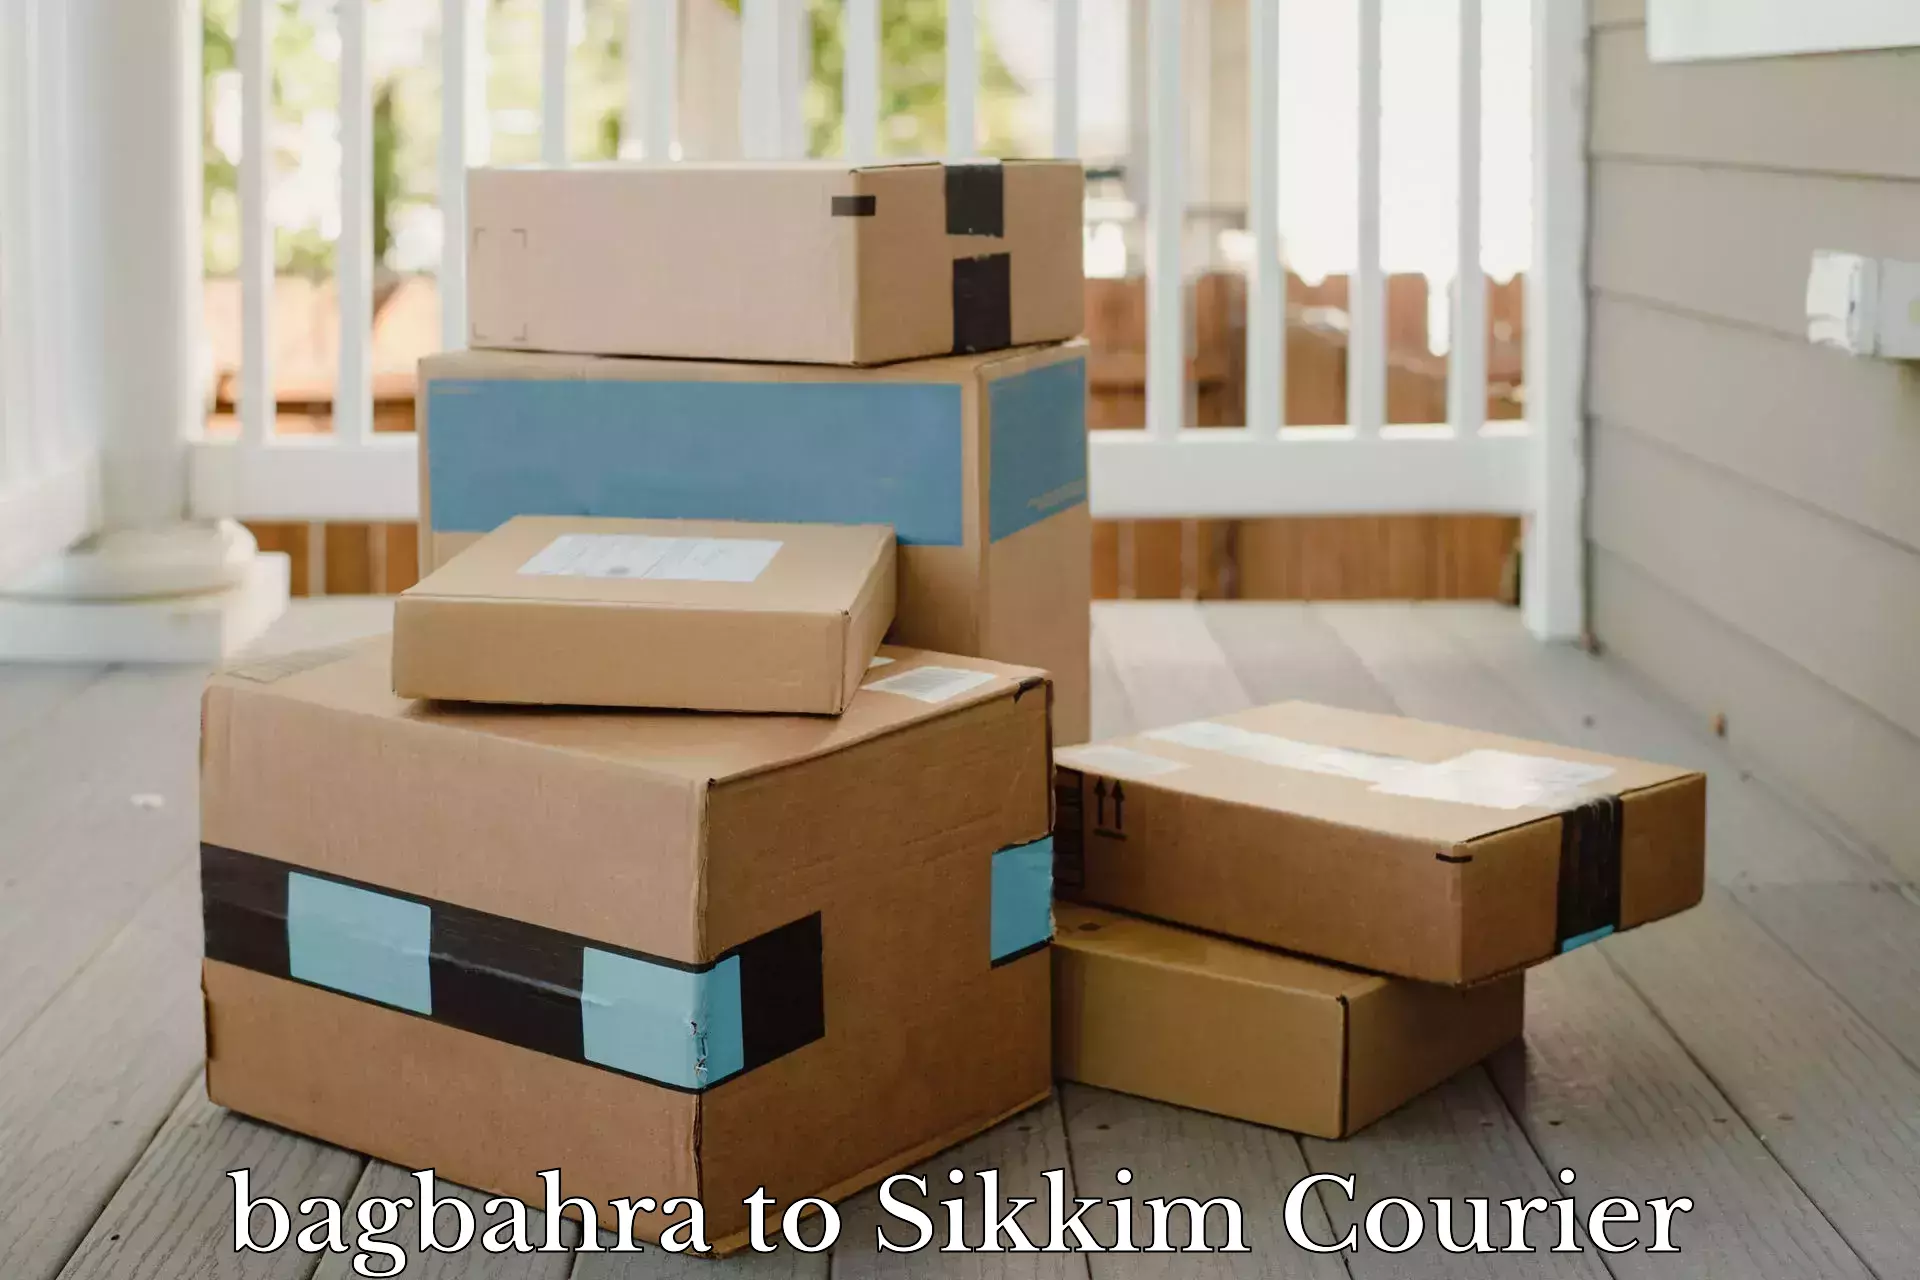 24-hour courier services bagbahra to Geyzing